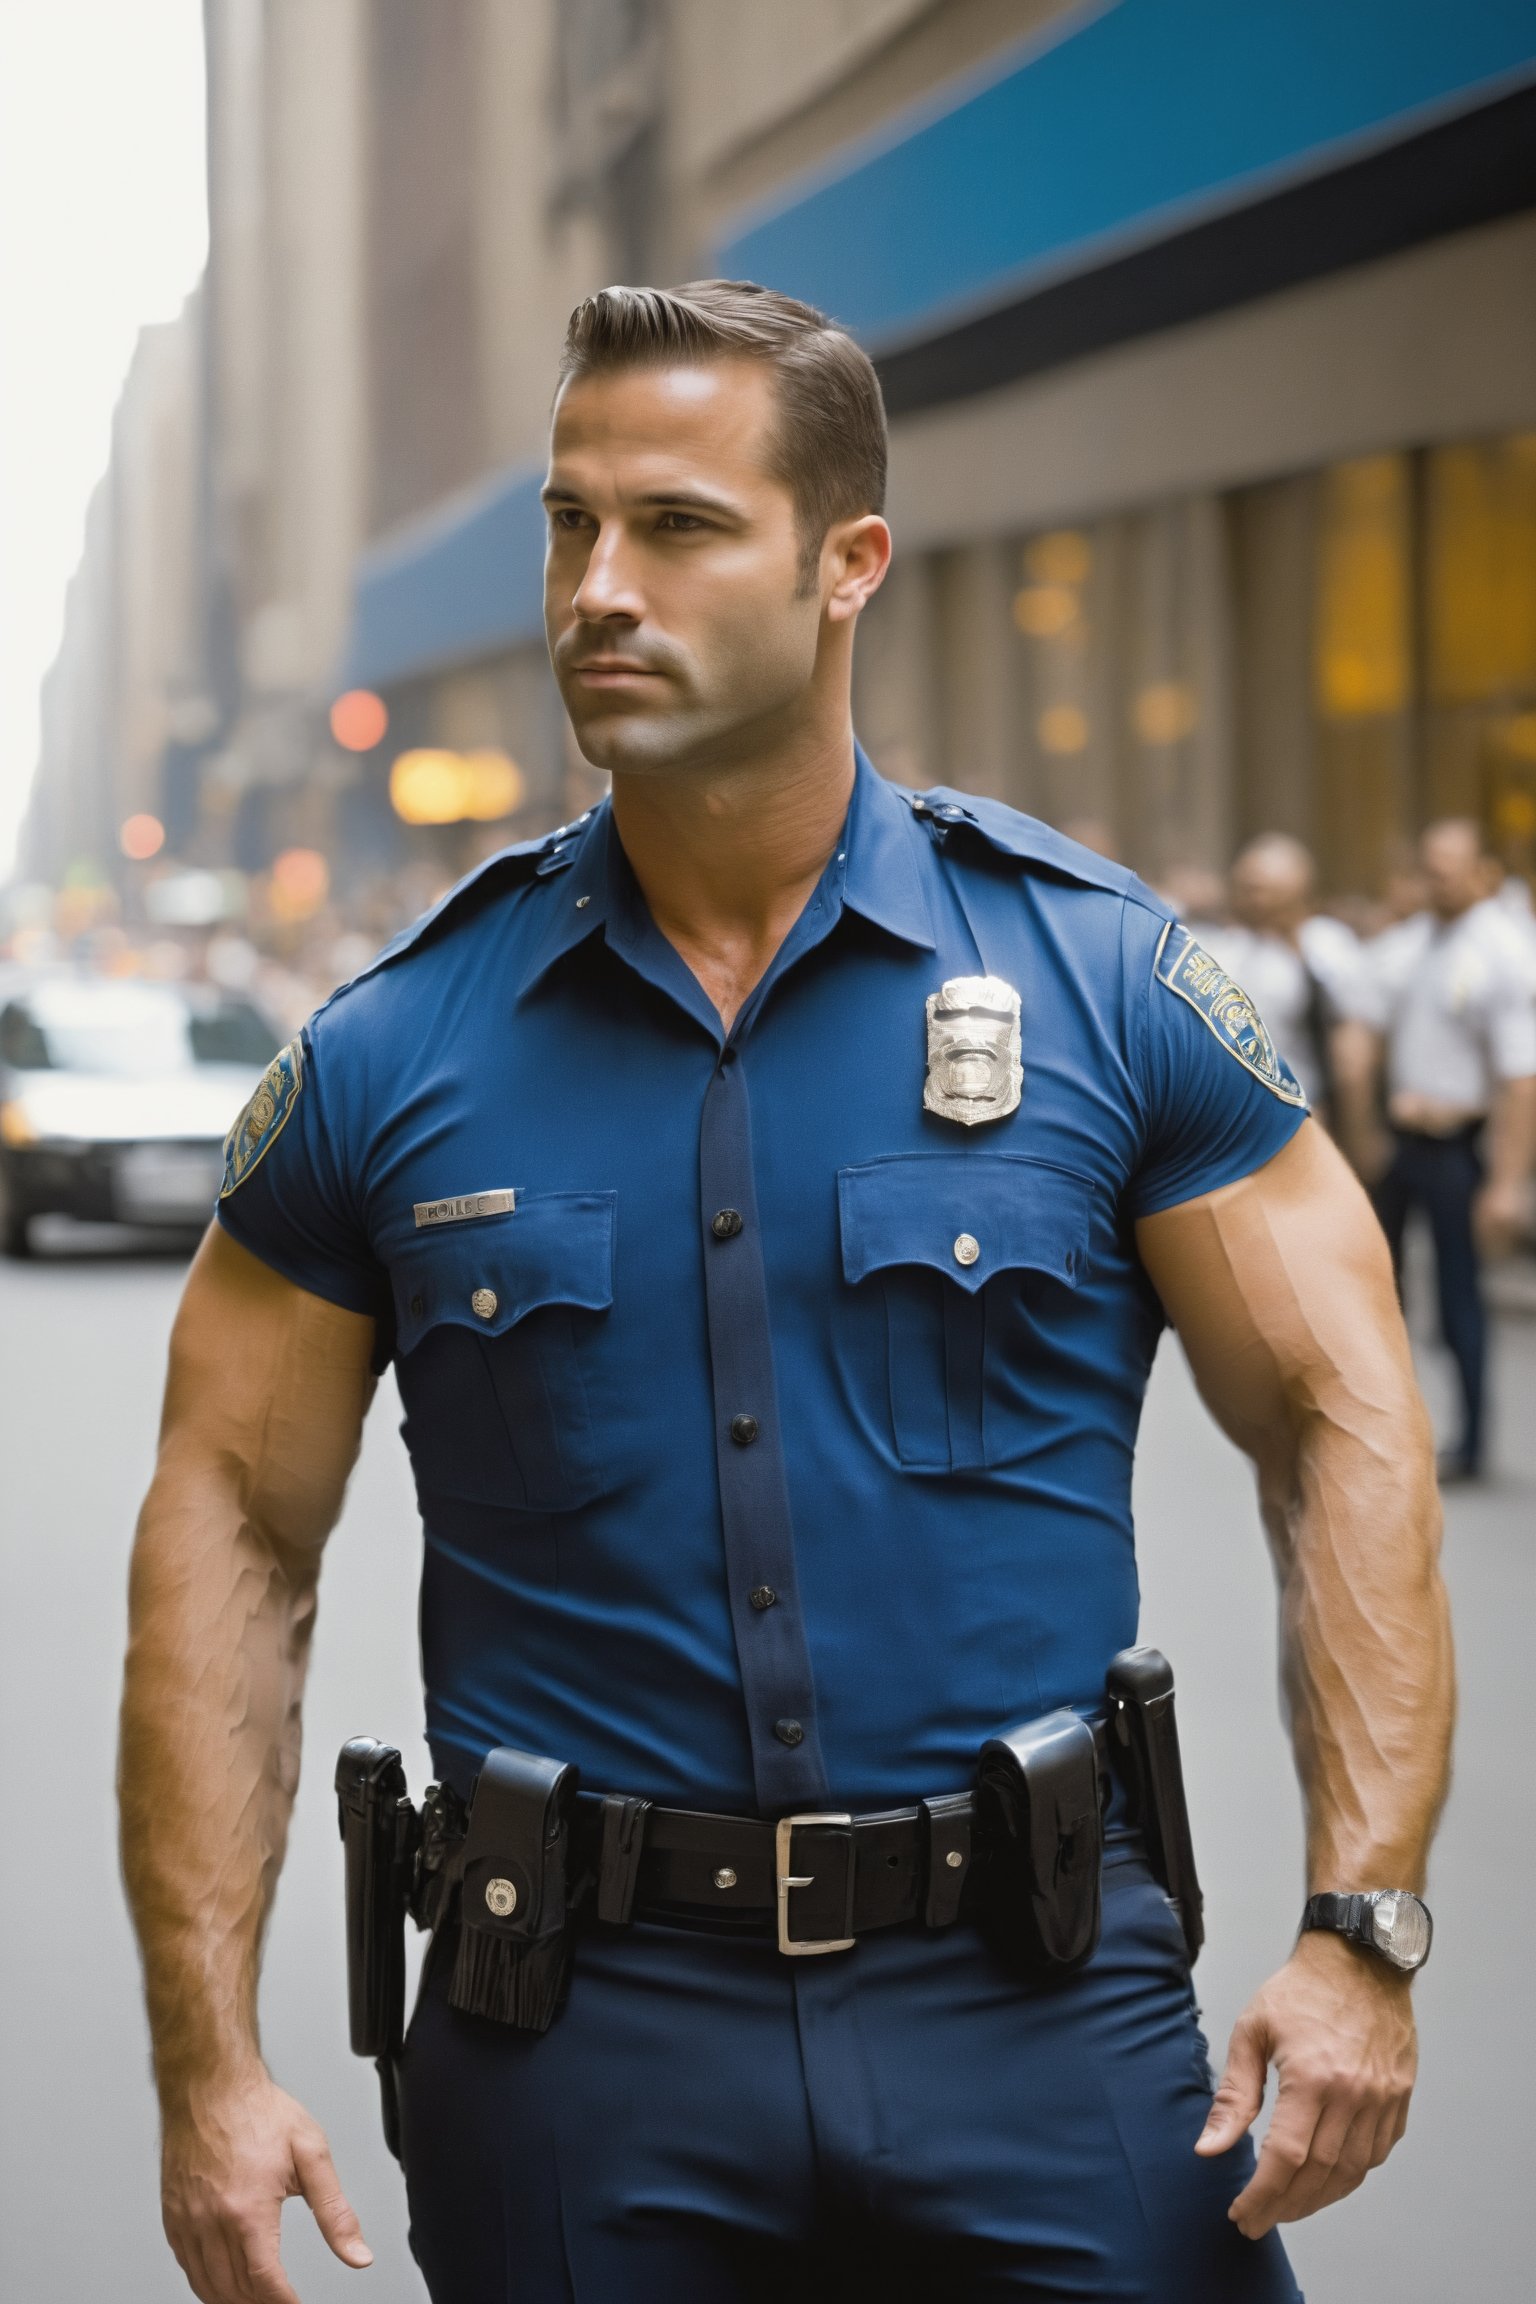 32 year-old muscular, handsome man, in police officer uniform. large, defined, solid, muscular bubble buttocks. body standing tp the side, hands relaxed, professional, glistening in thick oil. outdoor on crowded city street, photography, posing with style, ,bulge,Stylish,huge cock,Man,Portrait,anime,hugest man ever,Police